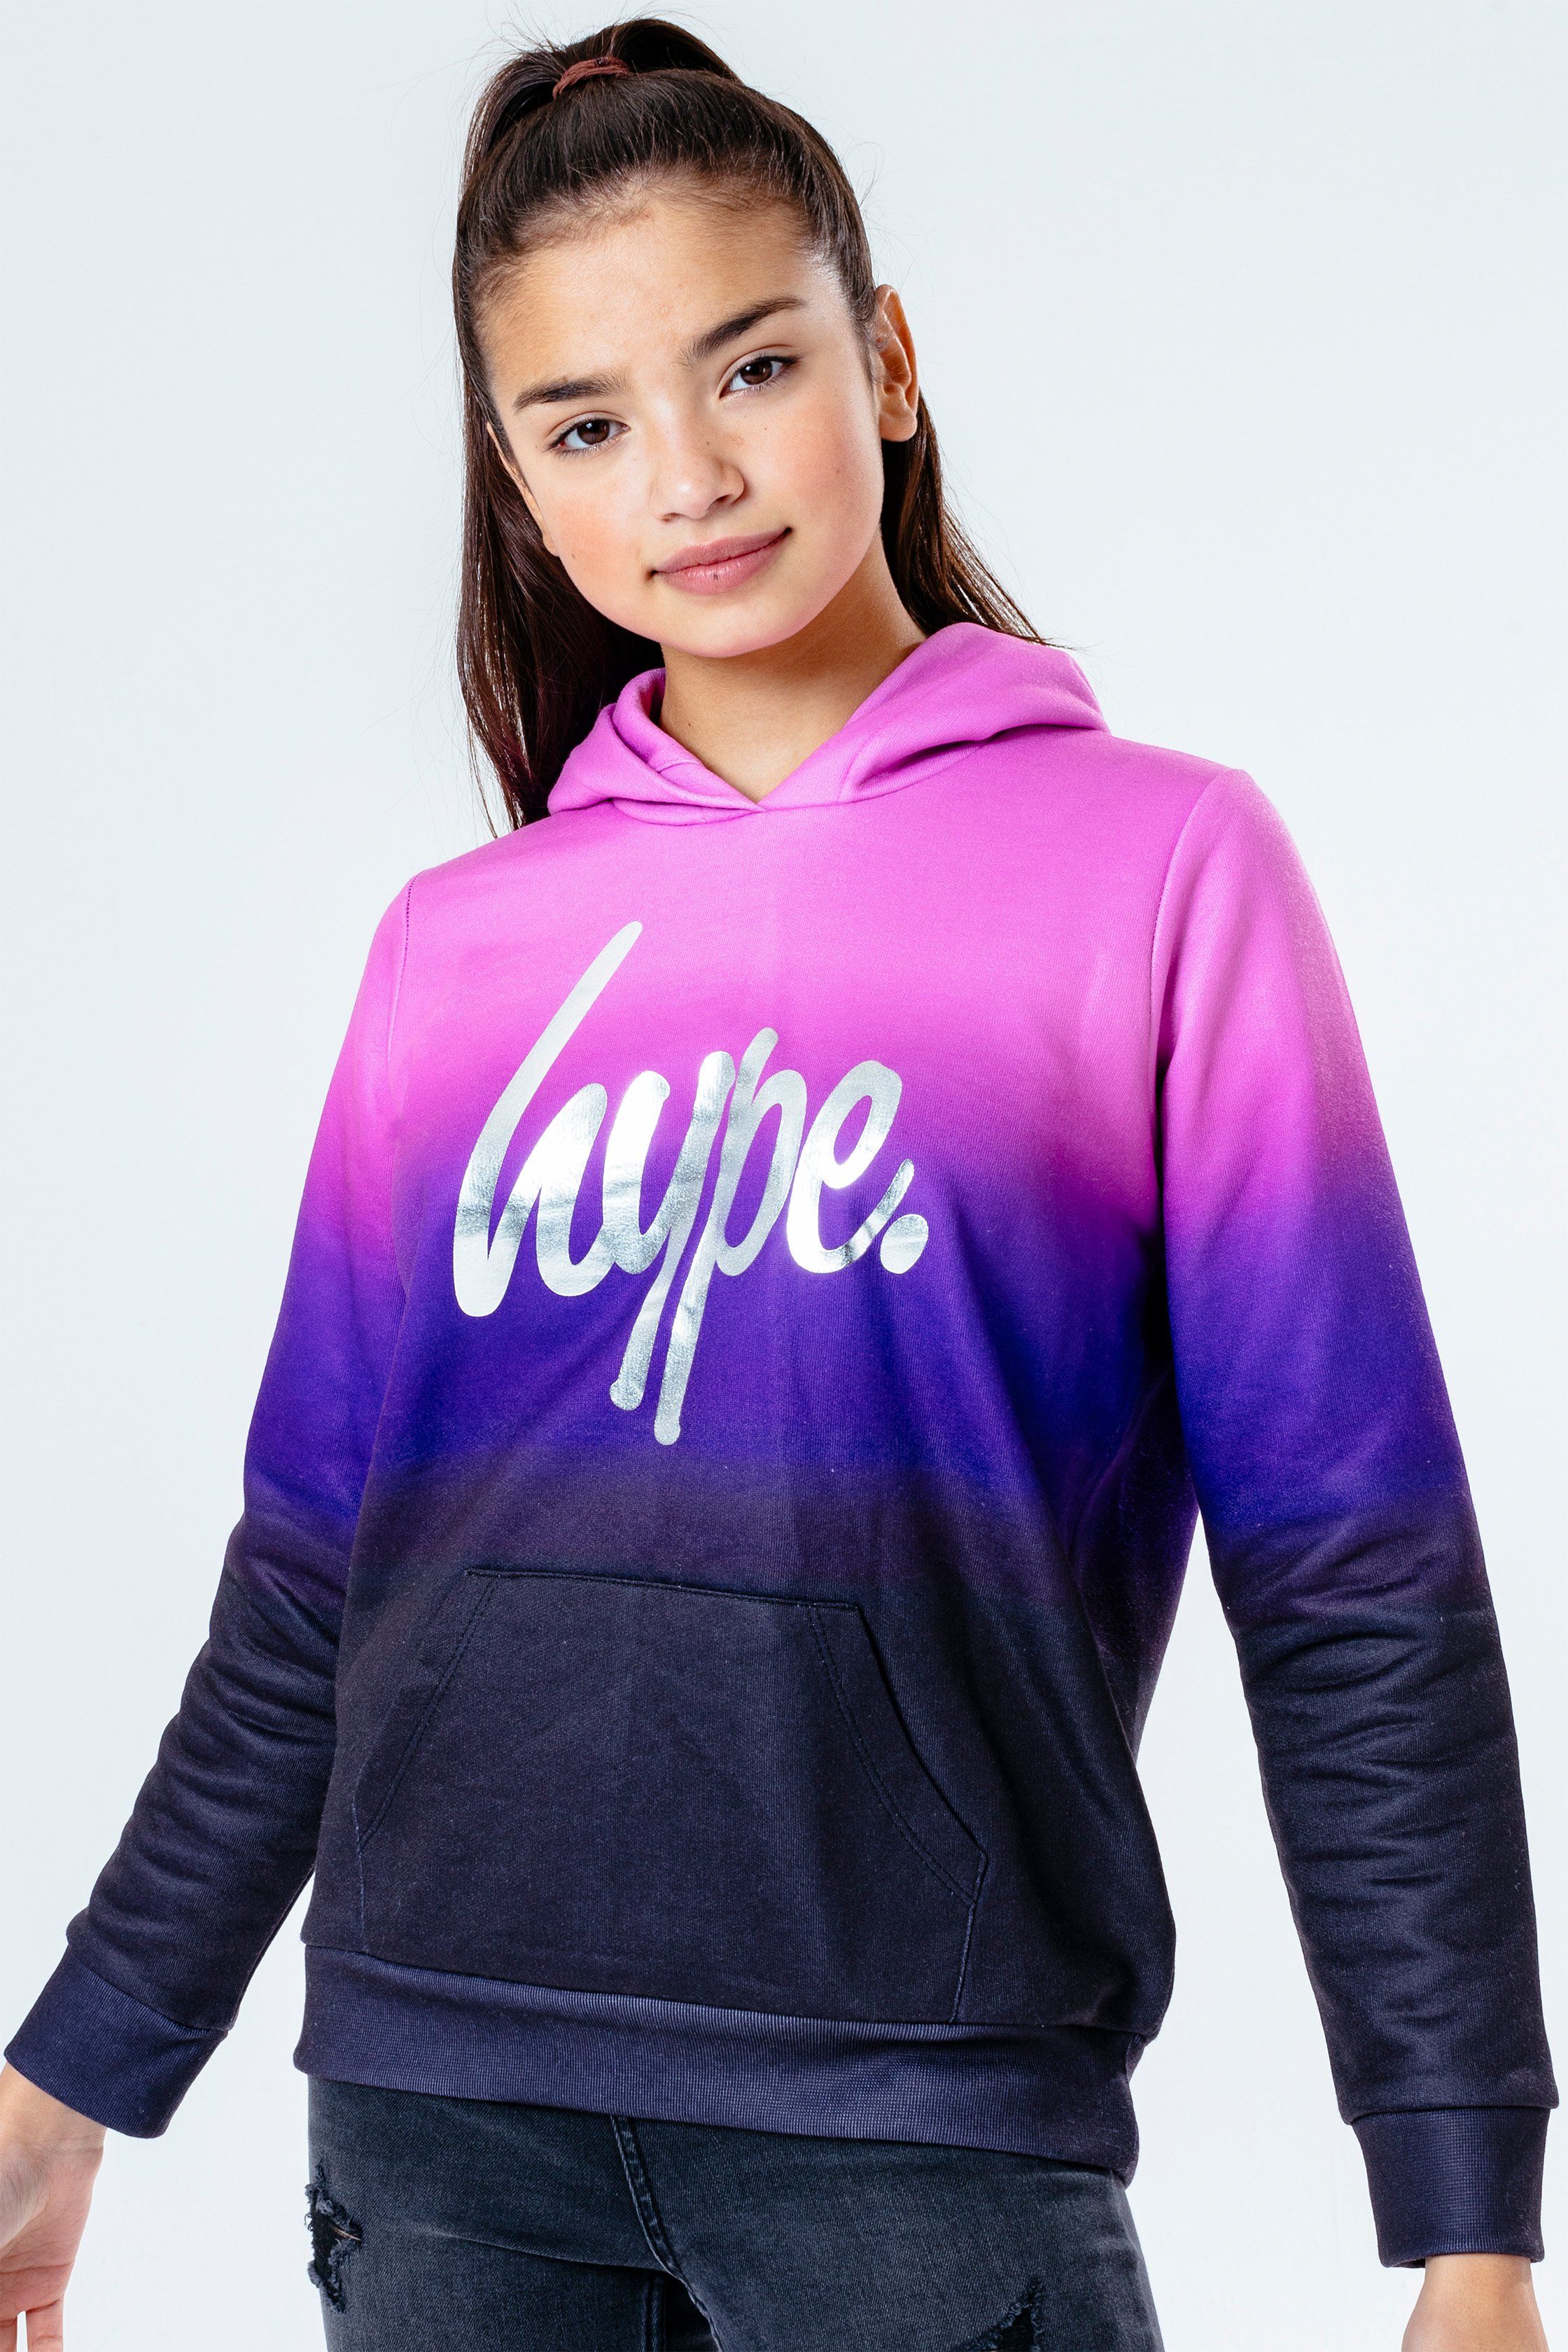 Update your 'drobe with the HYPE. Sweetshop Fade Kids Pullover Hoodie. Designed in a black and light purple, purple and black colour palette in a 60% polyester and 40% cotton fabric base for supreme comfort in our standard unisex kids jumper shape. With a fixed hood, kangaroo pocket, long sleeves and fitted hem and cuffs. Finished with the iconic HYPE. script logo in a silver foil transfer. Wear with cycle shorts for an on-trend look. Machine wash at 30 degrees.